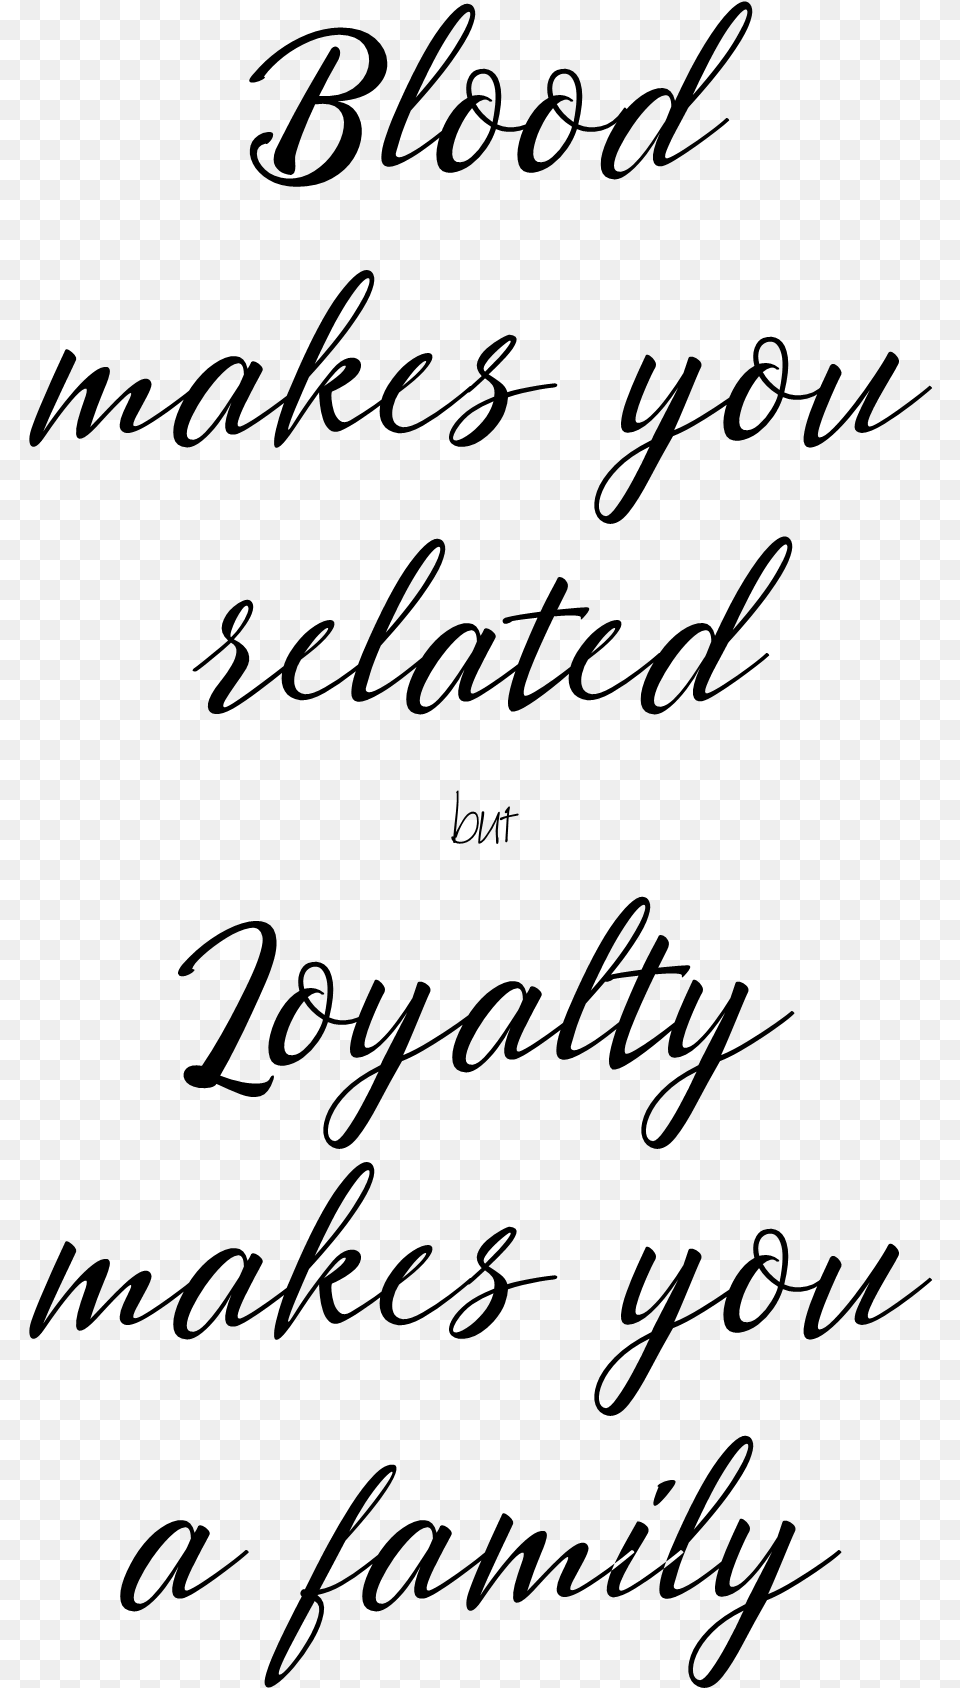 Blood Makes You Related But Loyalty Makes You Family Love You Vinyl Decal Lettering For Diy Project For, Gray Png Image